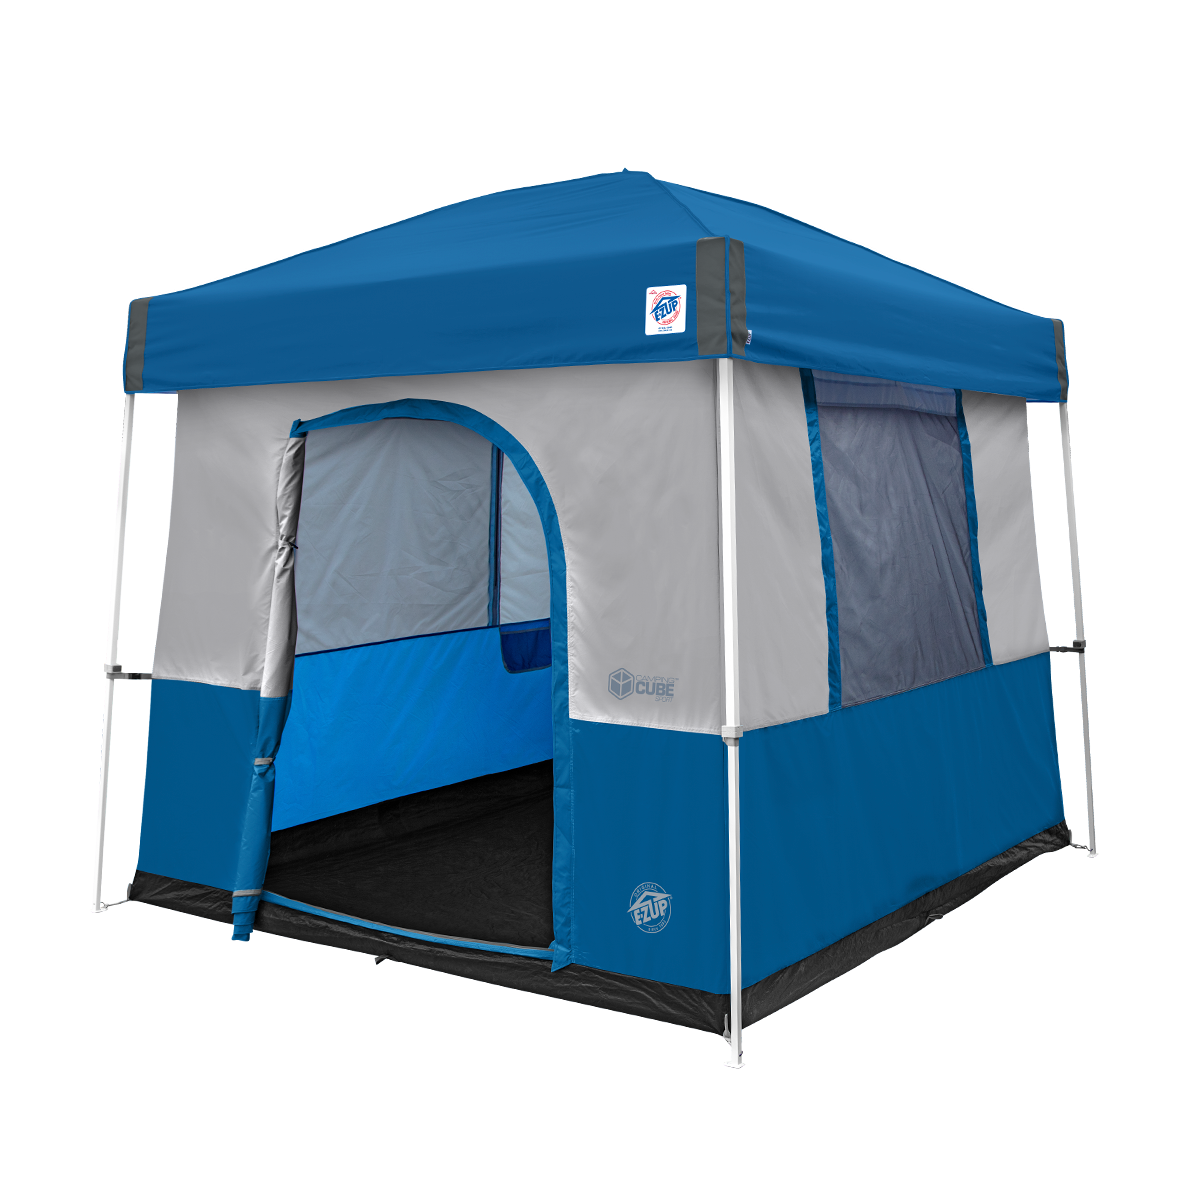 Camping Cube™ Sport